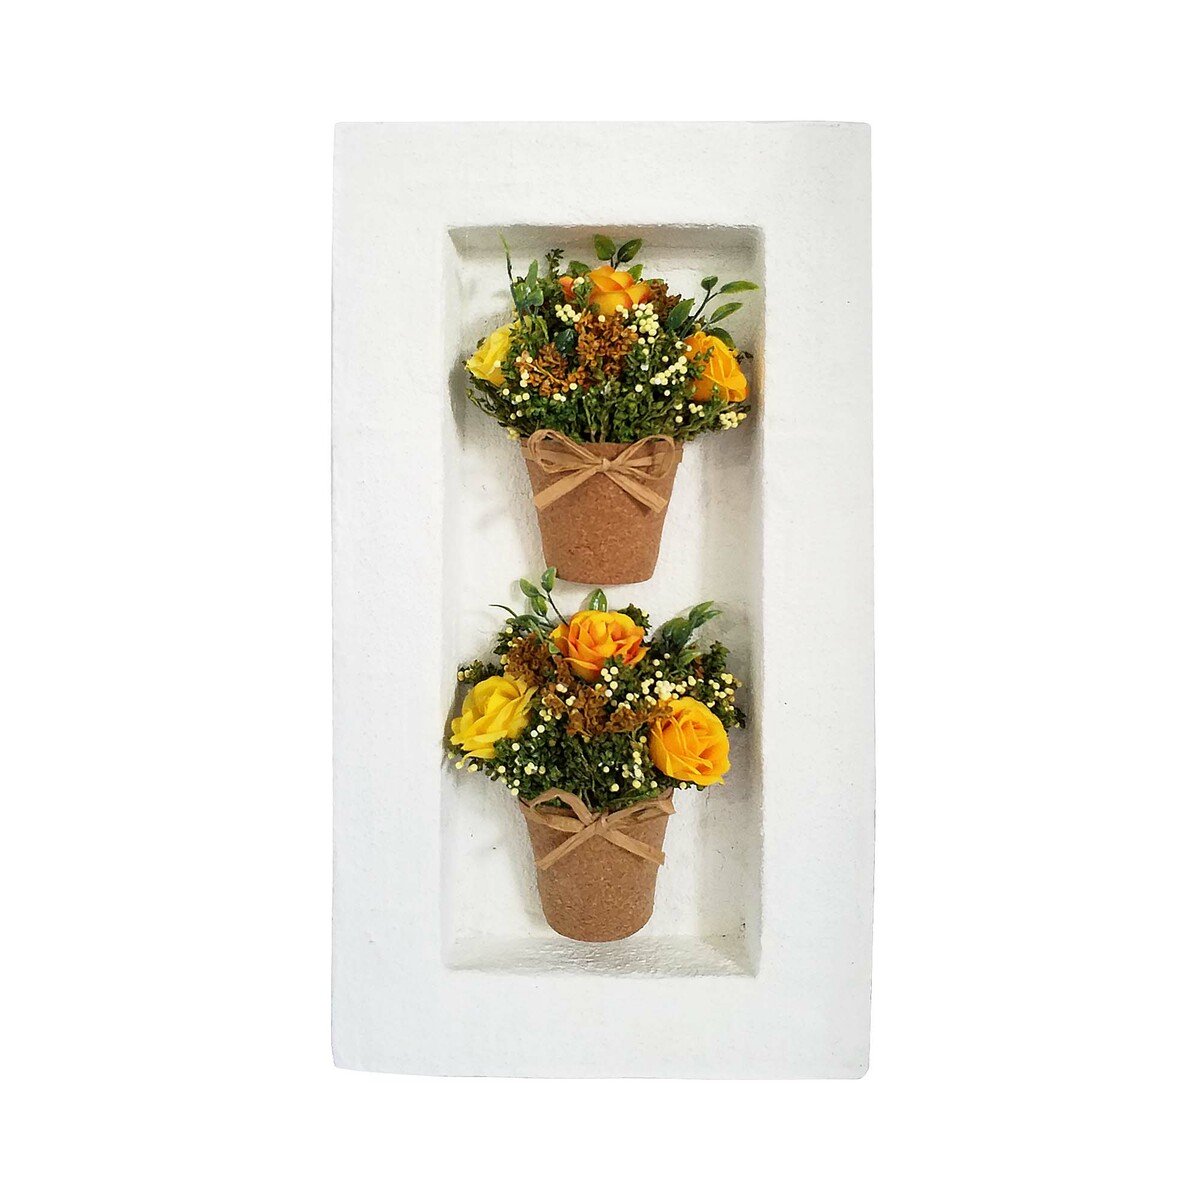 Maple Leaf Artificial Dried Flower, Rectangular Wall Decor with 2 Potted Roses E200 20.5x6x38.5cm Assorted Designs